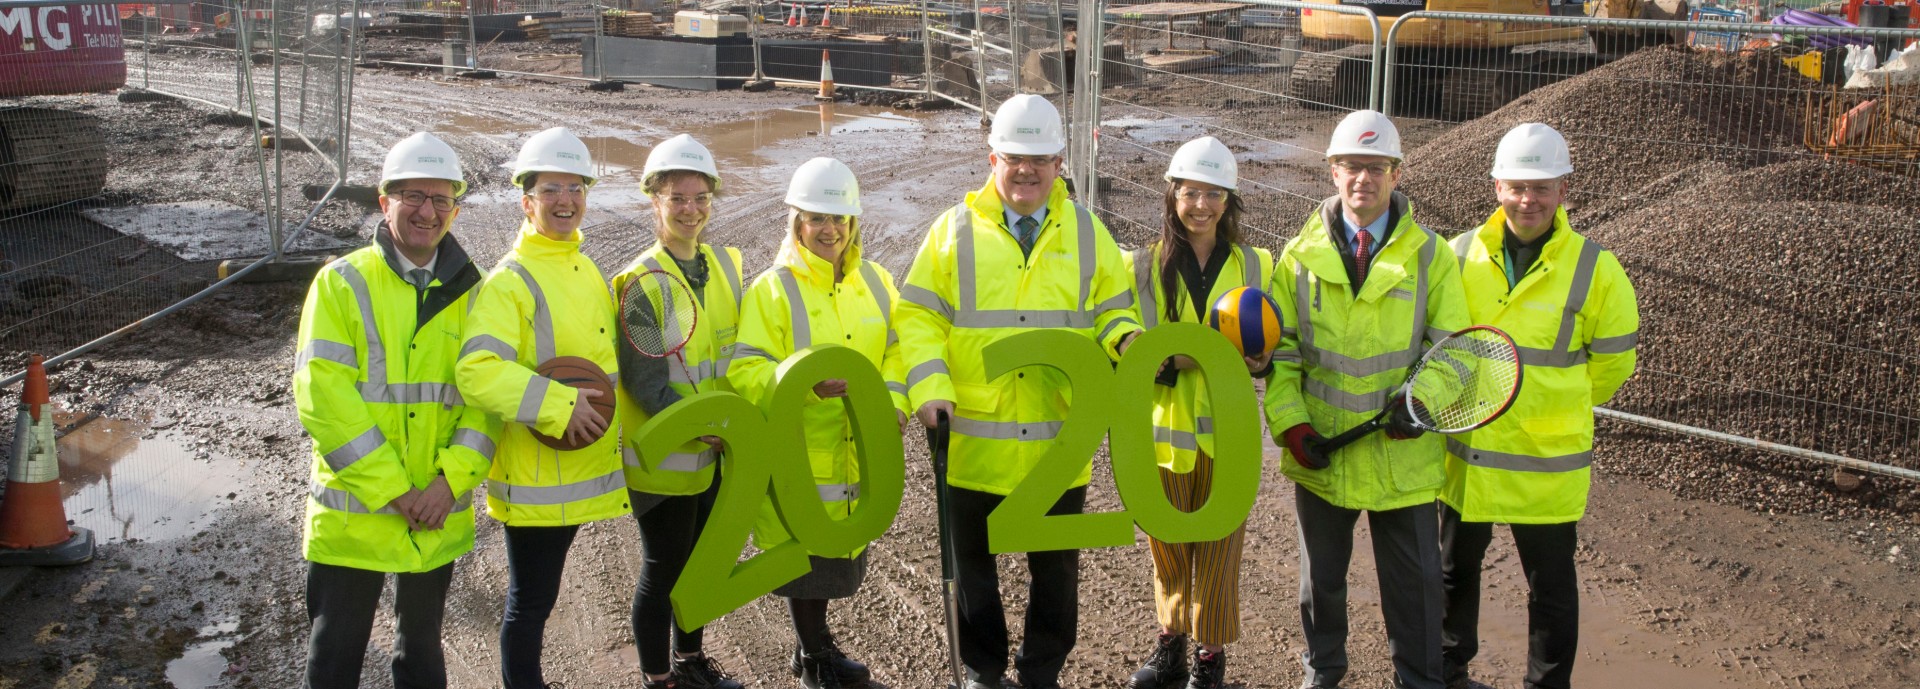 University of Stirling and Morrison Construction representatives on construction site of new sports centre